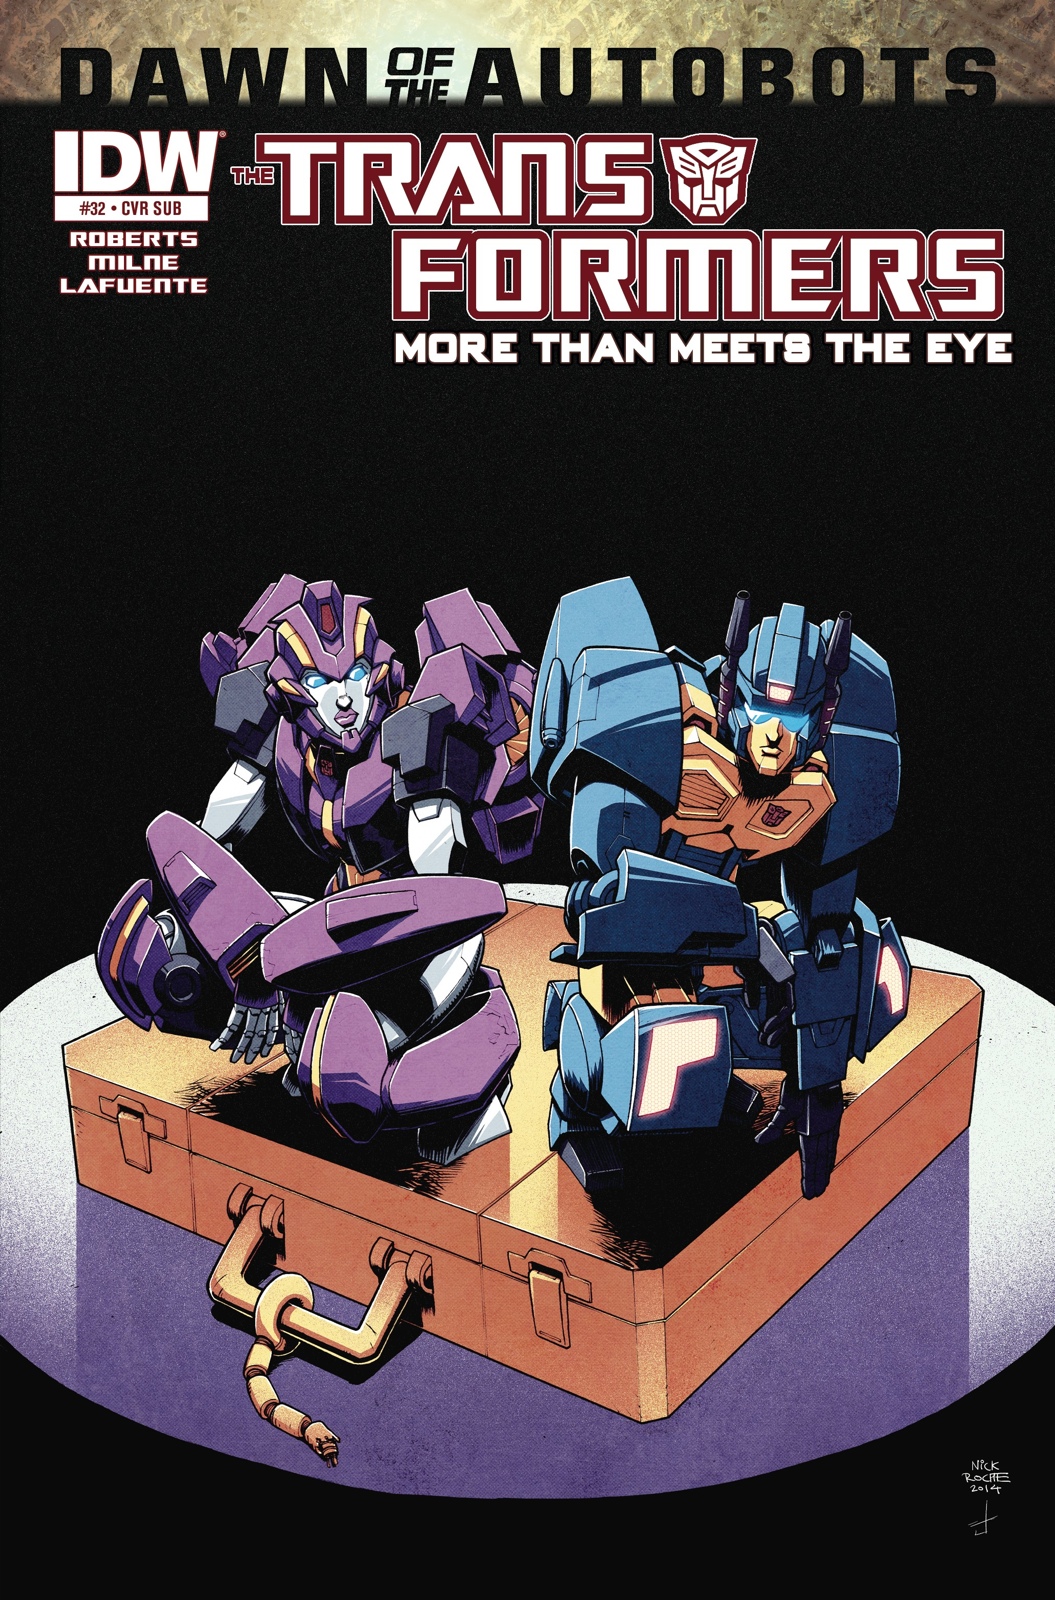 Transformers more. More than meets the Eye Transformers IDW. Transformers more than meets the Eye Toy. First Aid Transformers IDW. First Aid Transformers more than meets the Eye.